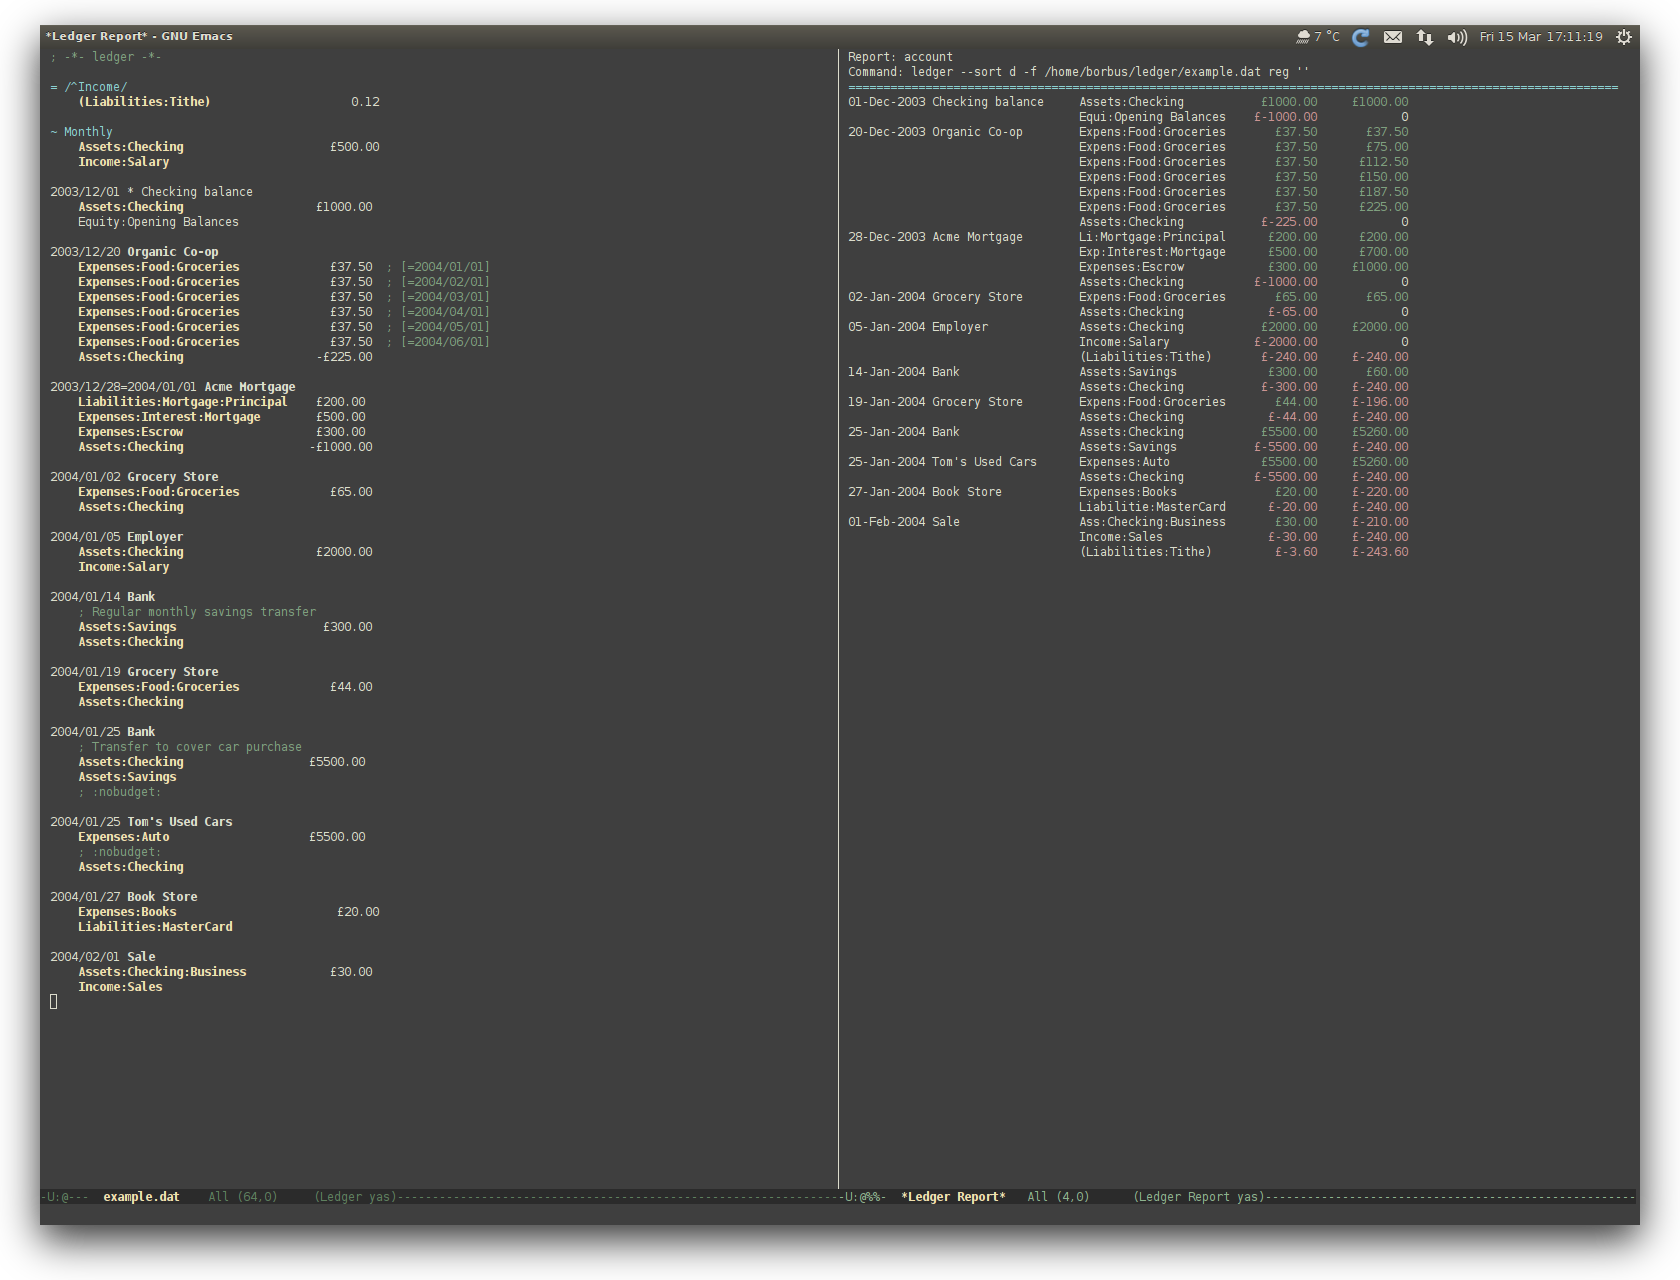 /TakeV/spacemacs/media/commit/1cacce8ebce5836e00d8c9966d4dfd7f6364bace/contrib/finance/img/ledger.png